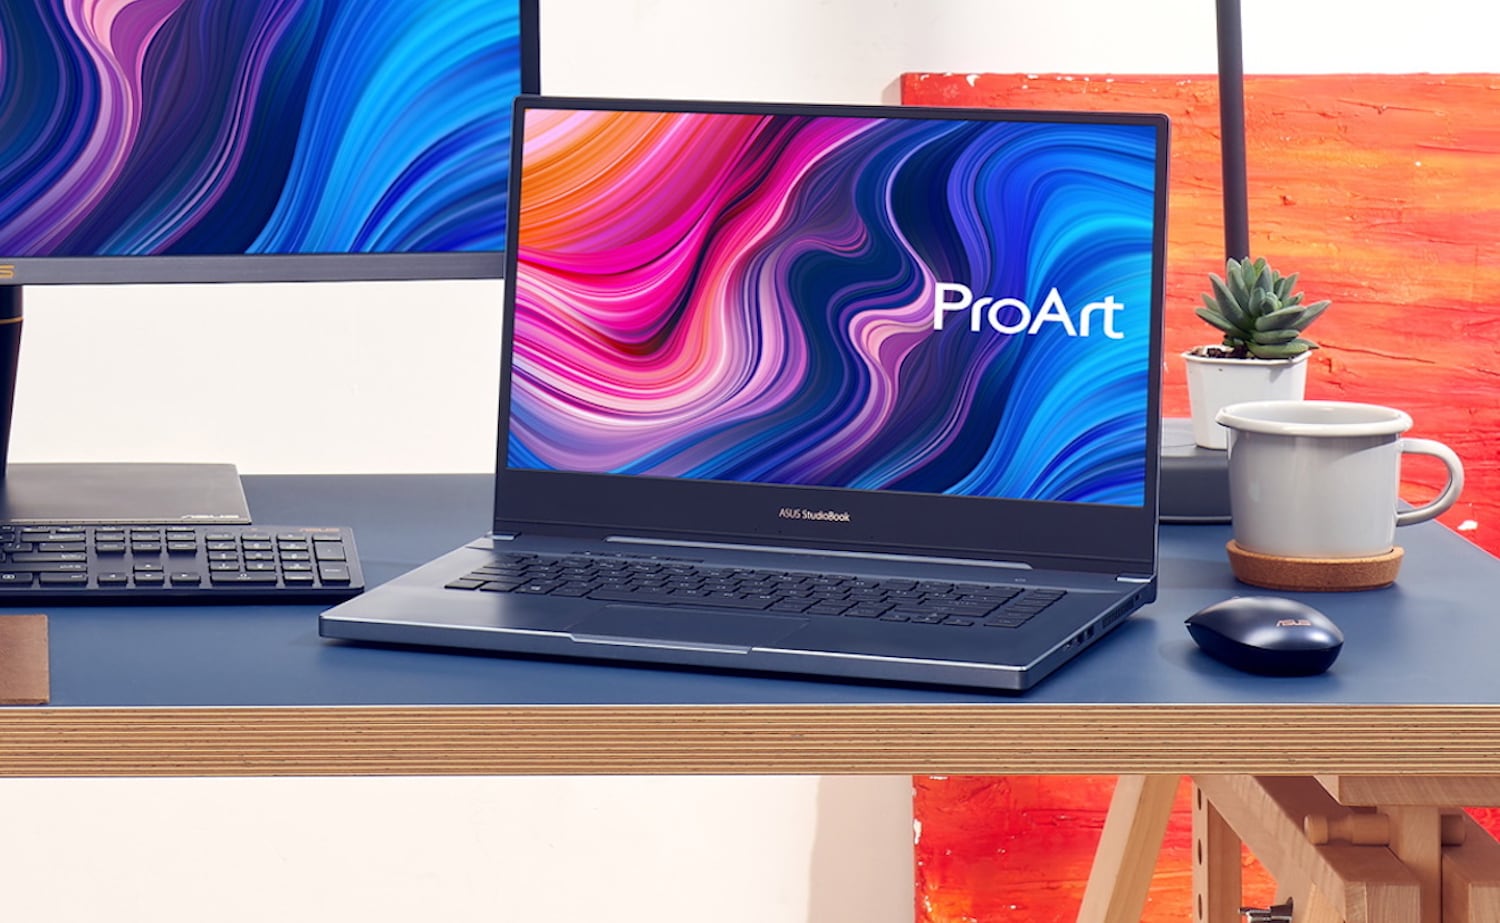 Work Faster Than Ever With The Asus Proart Studiobook One